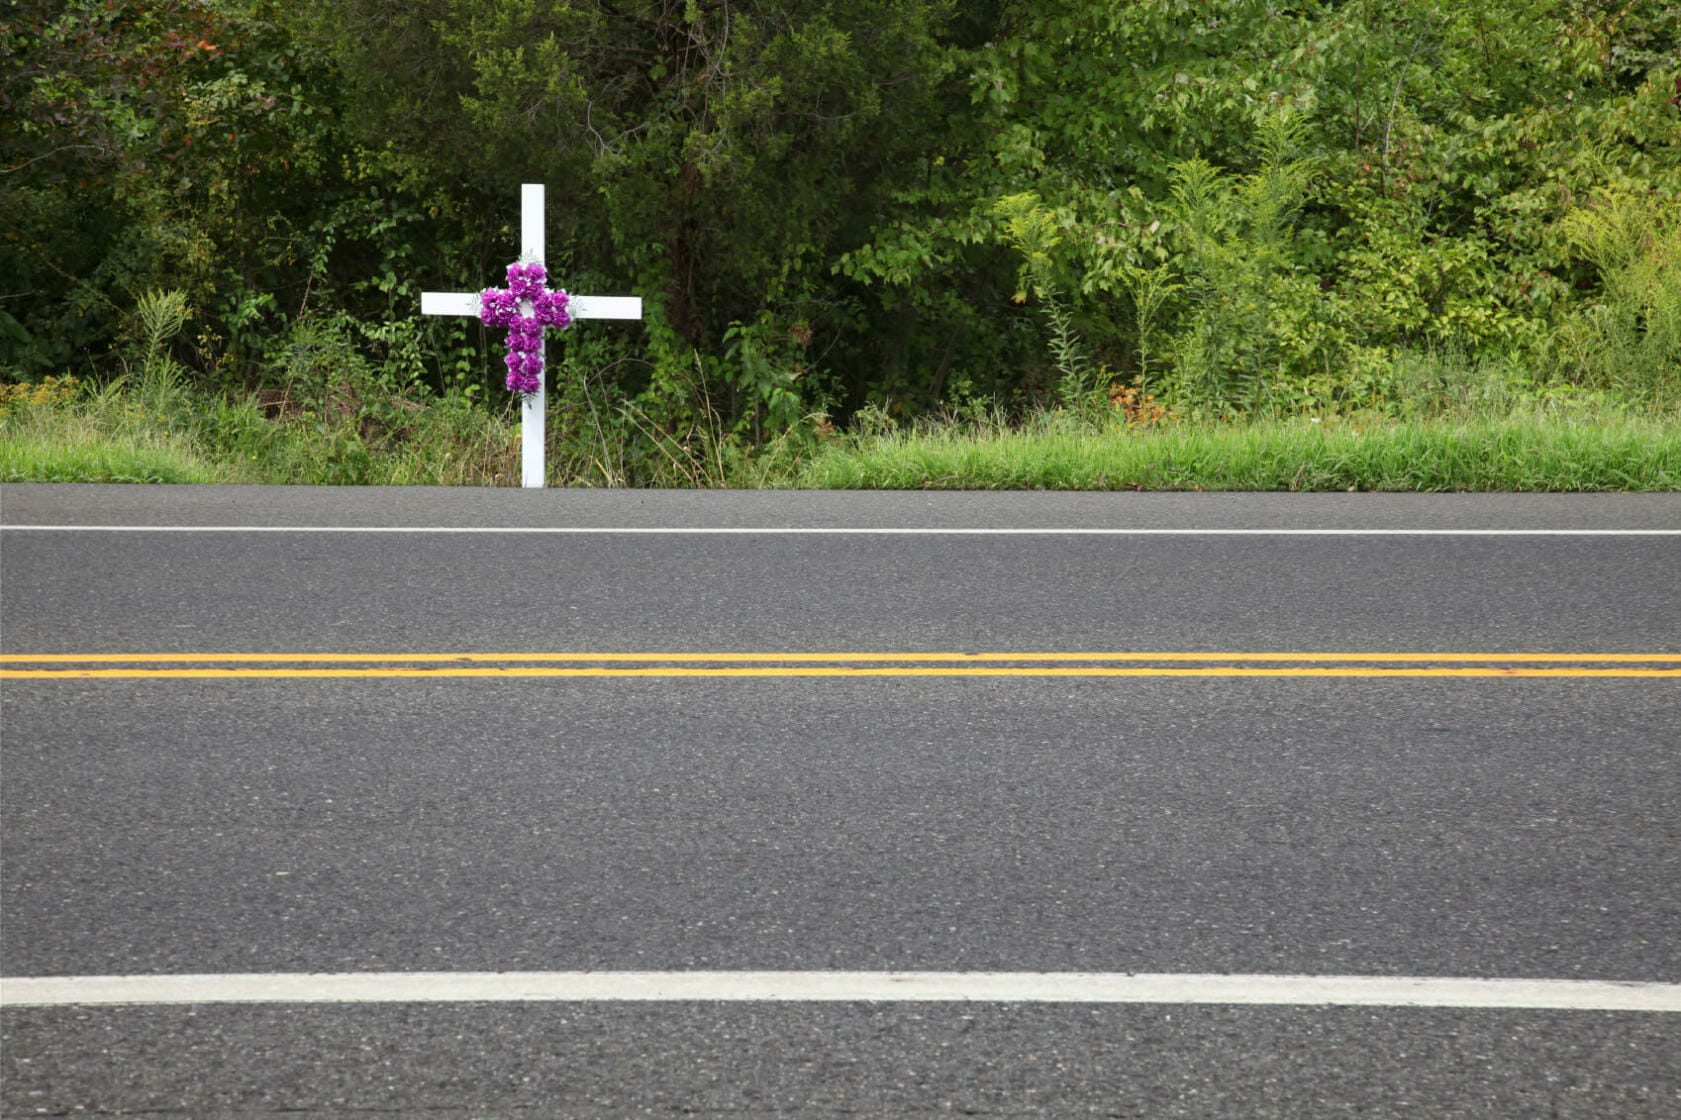 A white cross with roses on it alongside a road